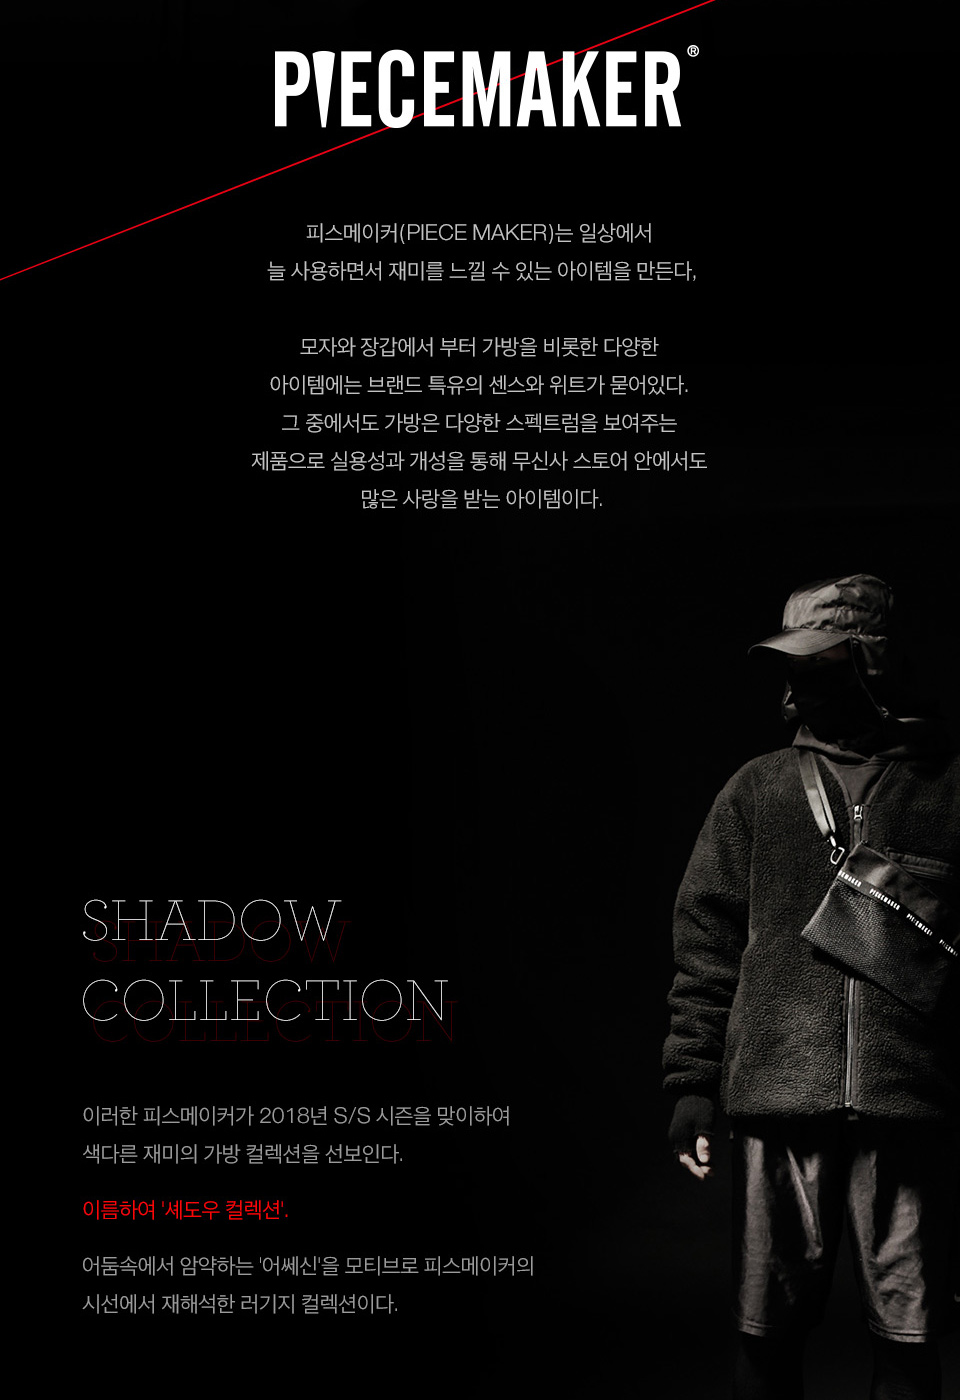 PIECEMAKER - SHADOW COLLECTION